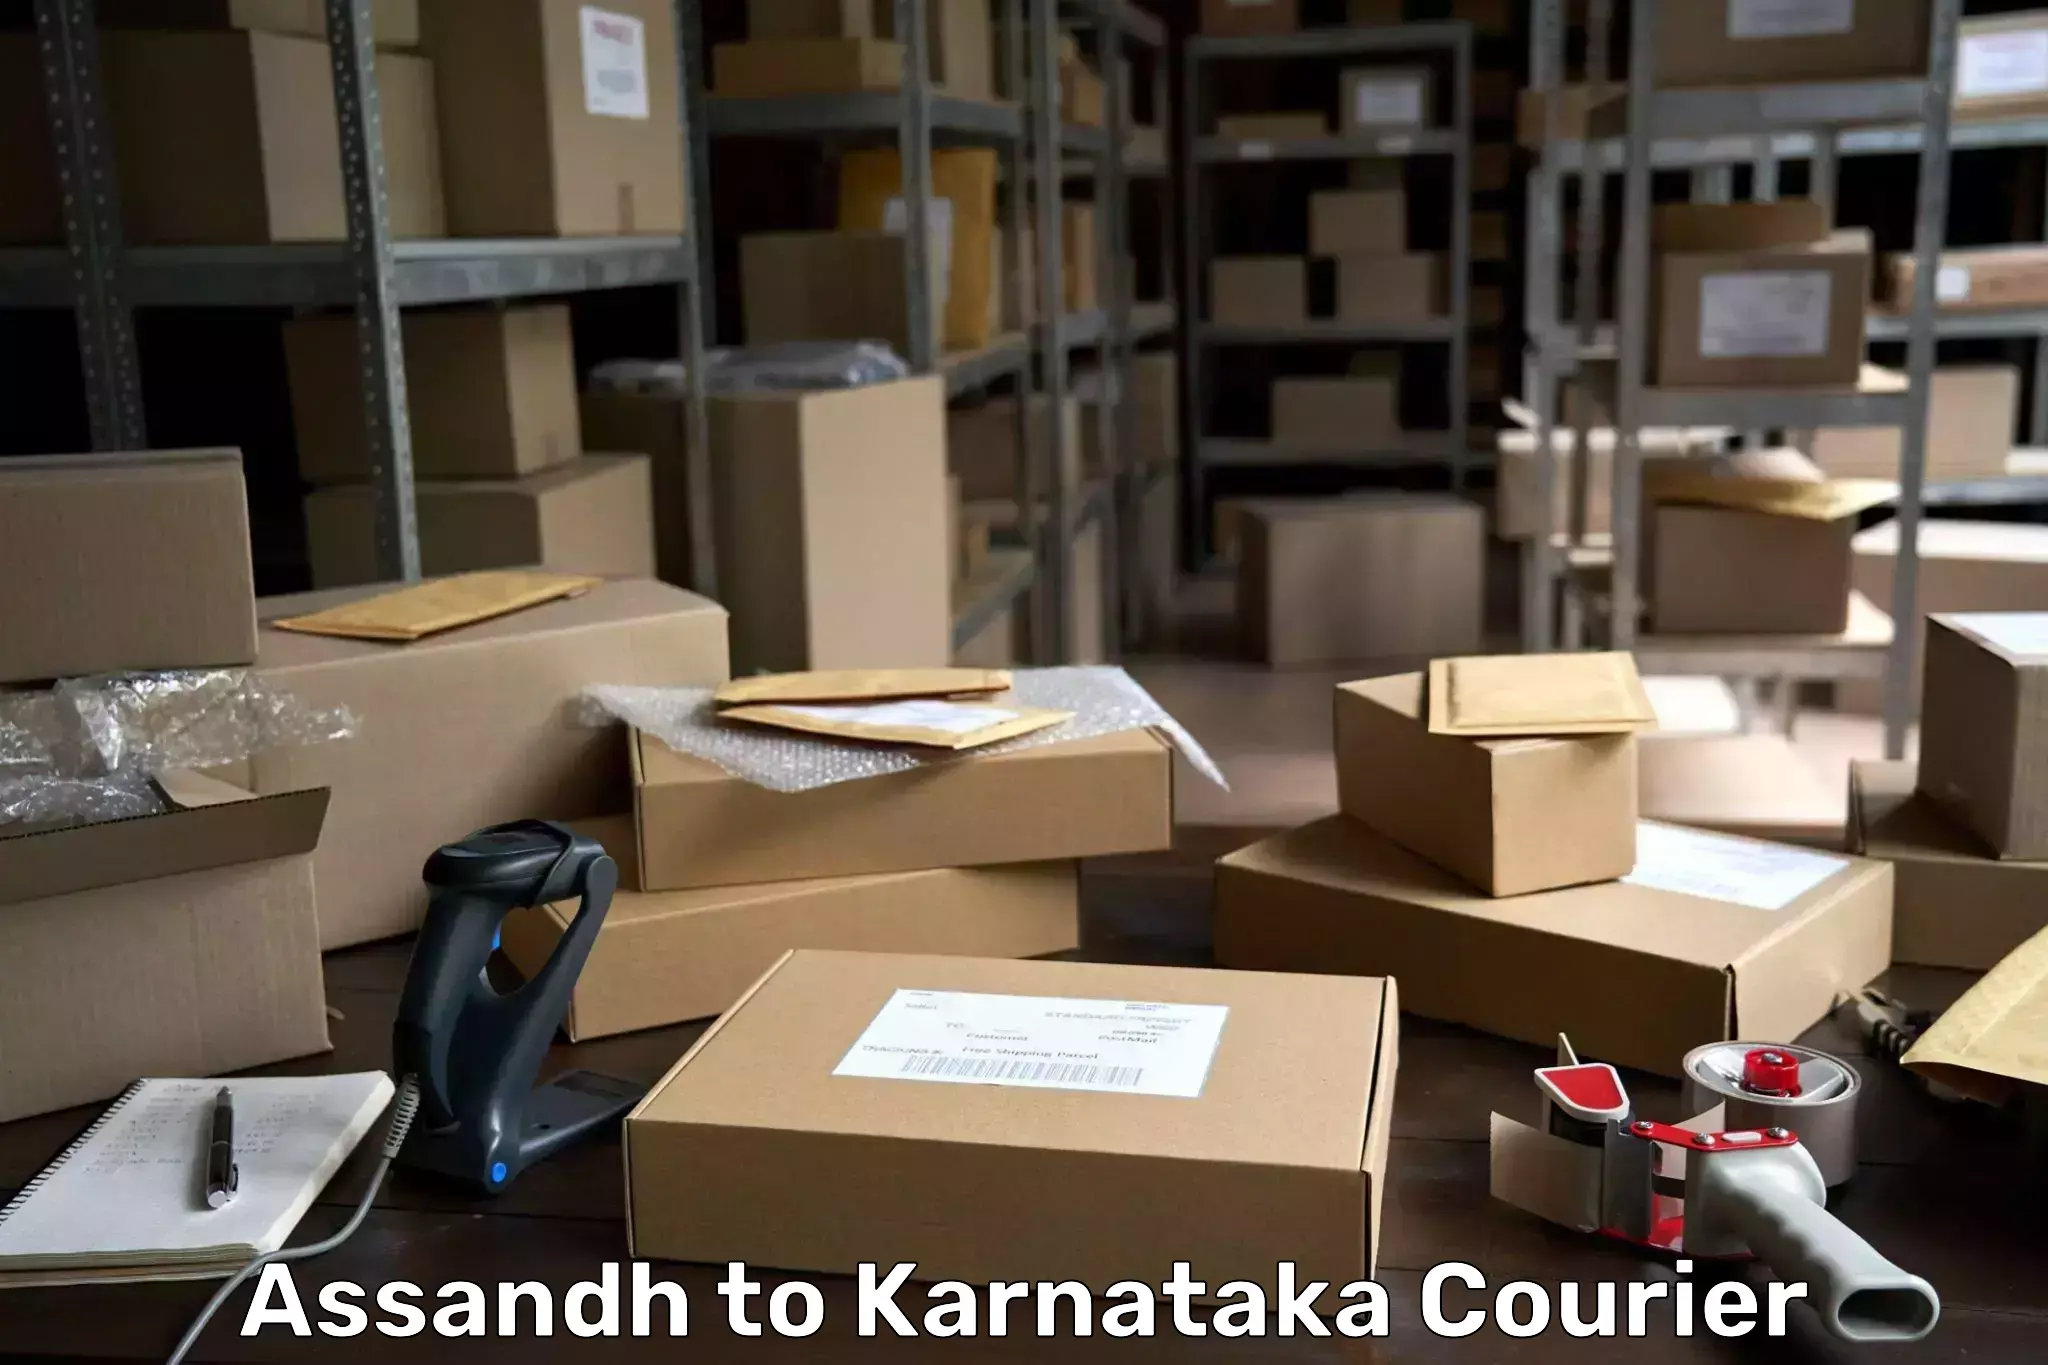 Multi-national courier services Assandh to Karnataka